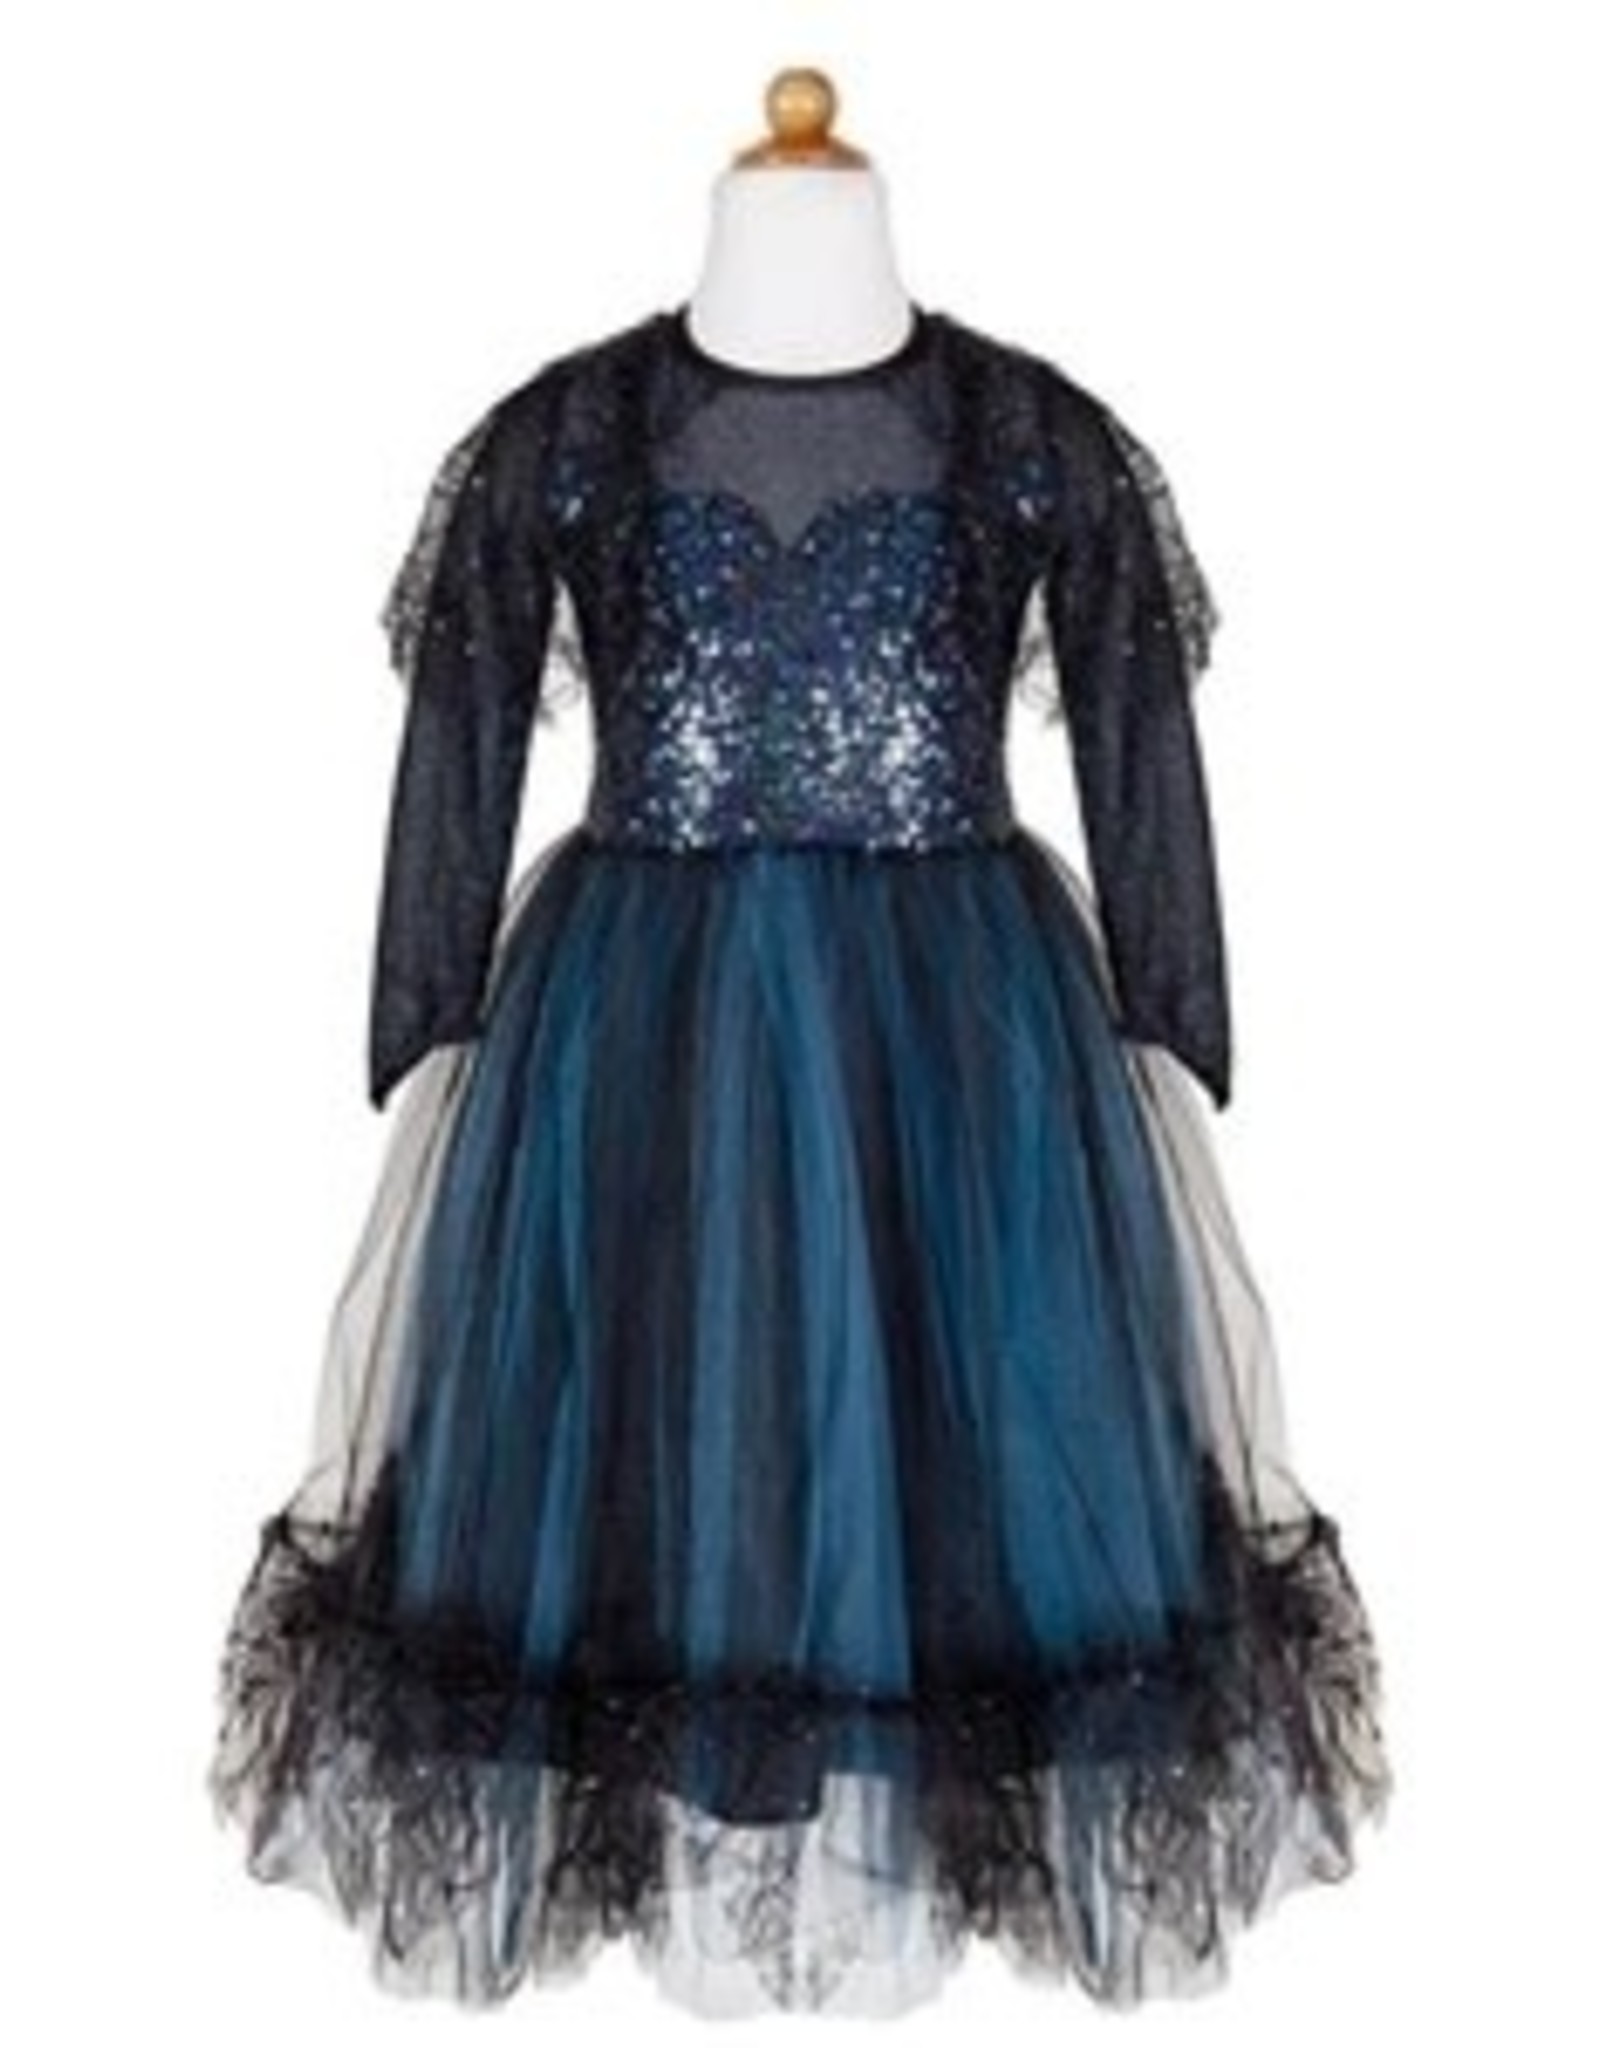 Great Pretenders Luna the Midnight Witch Dress & HB, Size 7-8